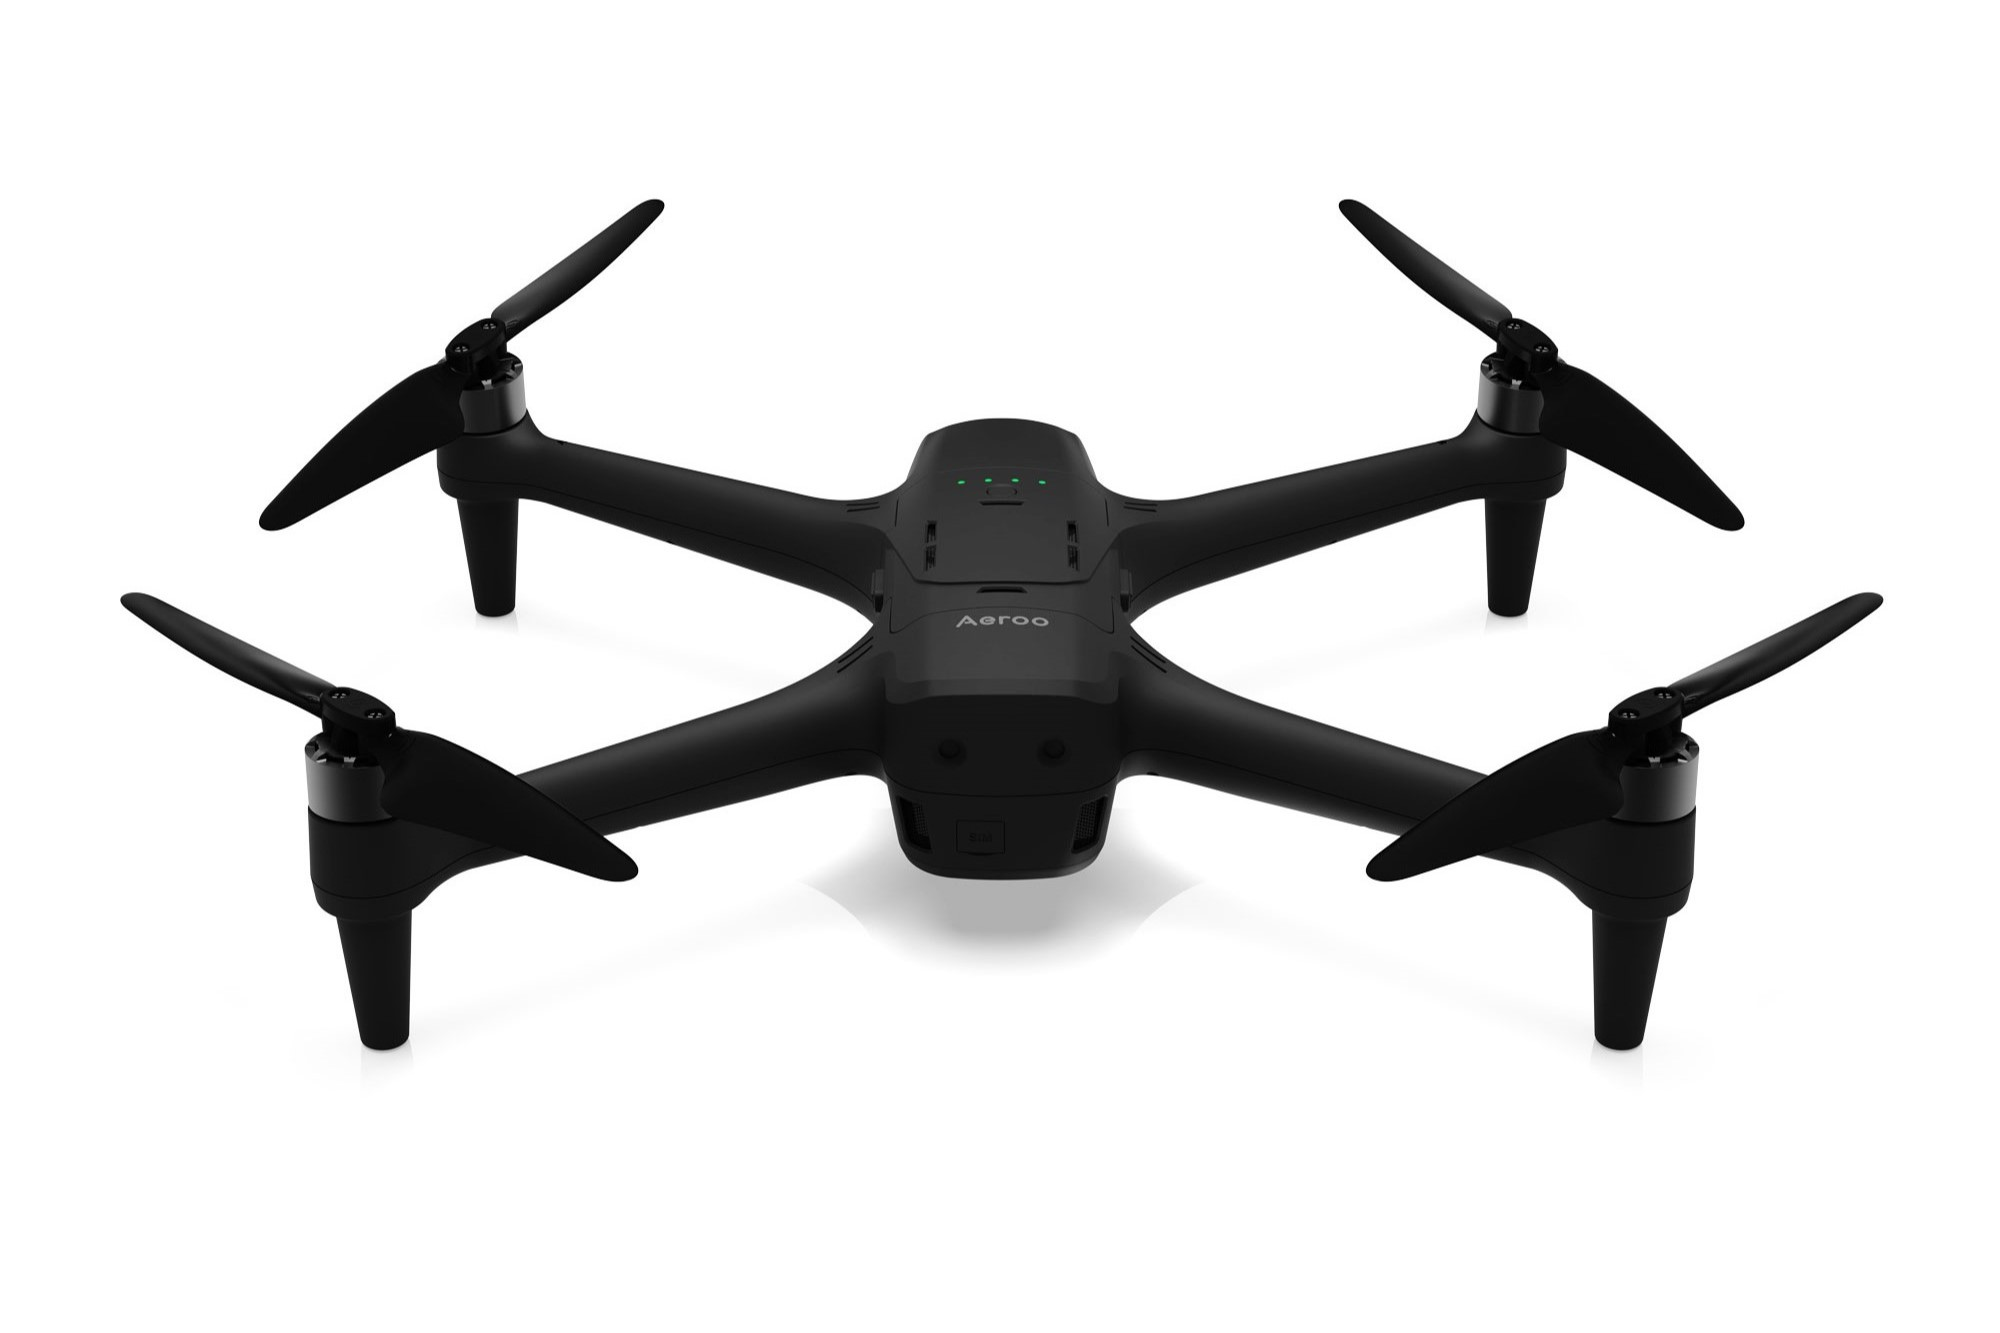 Aeroo Pro drone as seen from the rear and above.